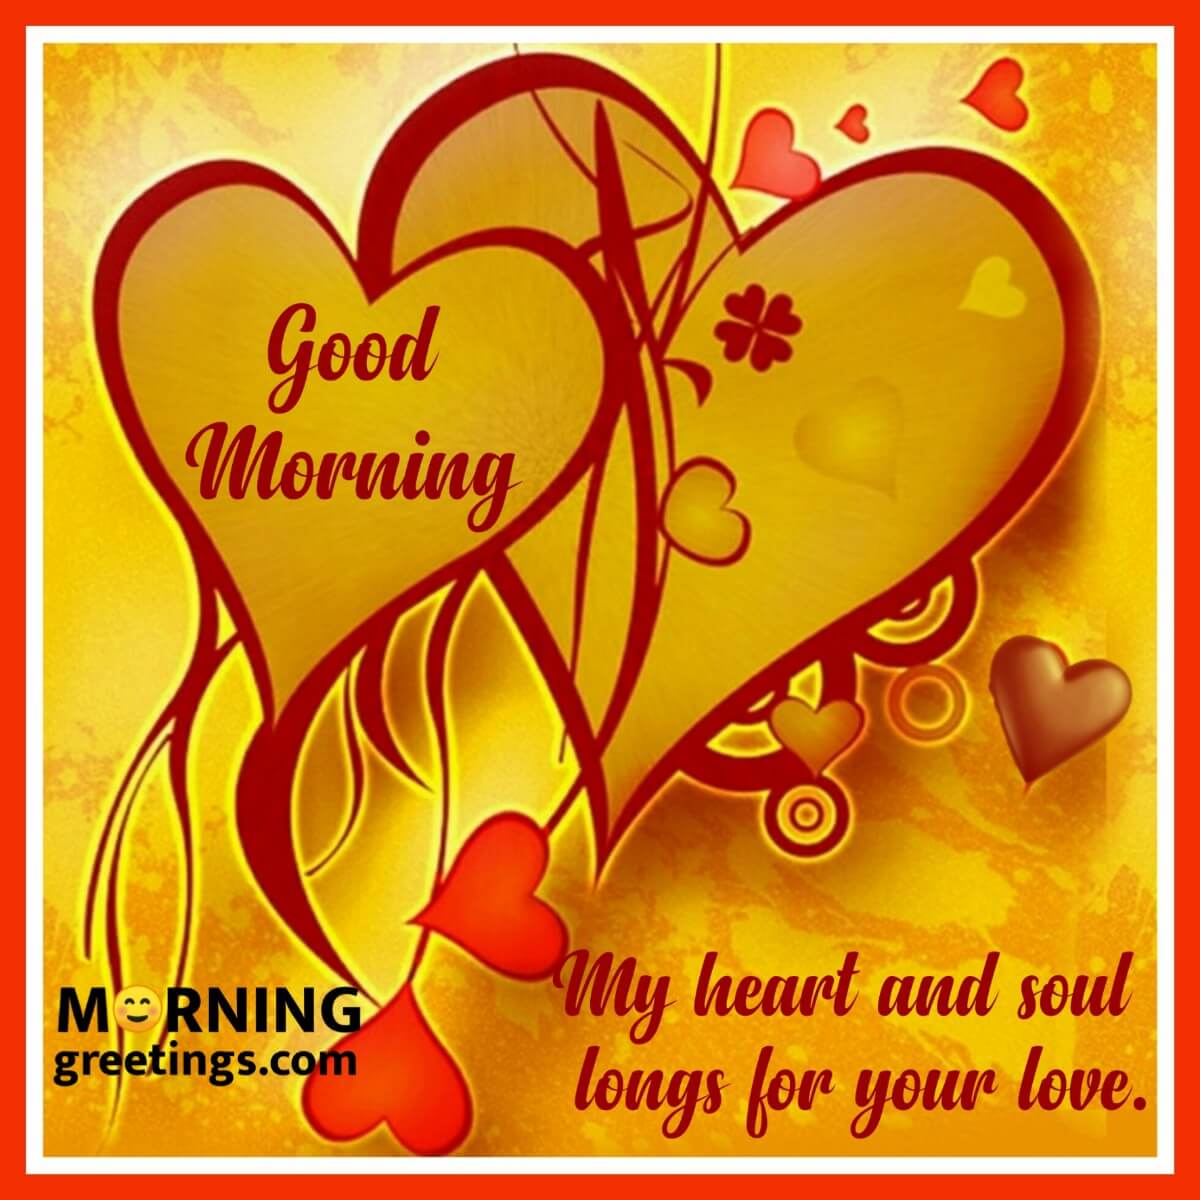 Good Morning Hug Quotes And Messages Cards Morning Greetings Morning Quotes And Wishes Images